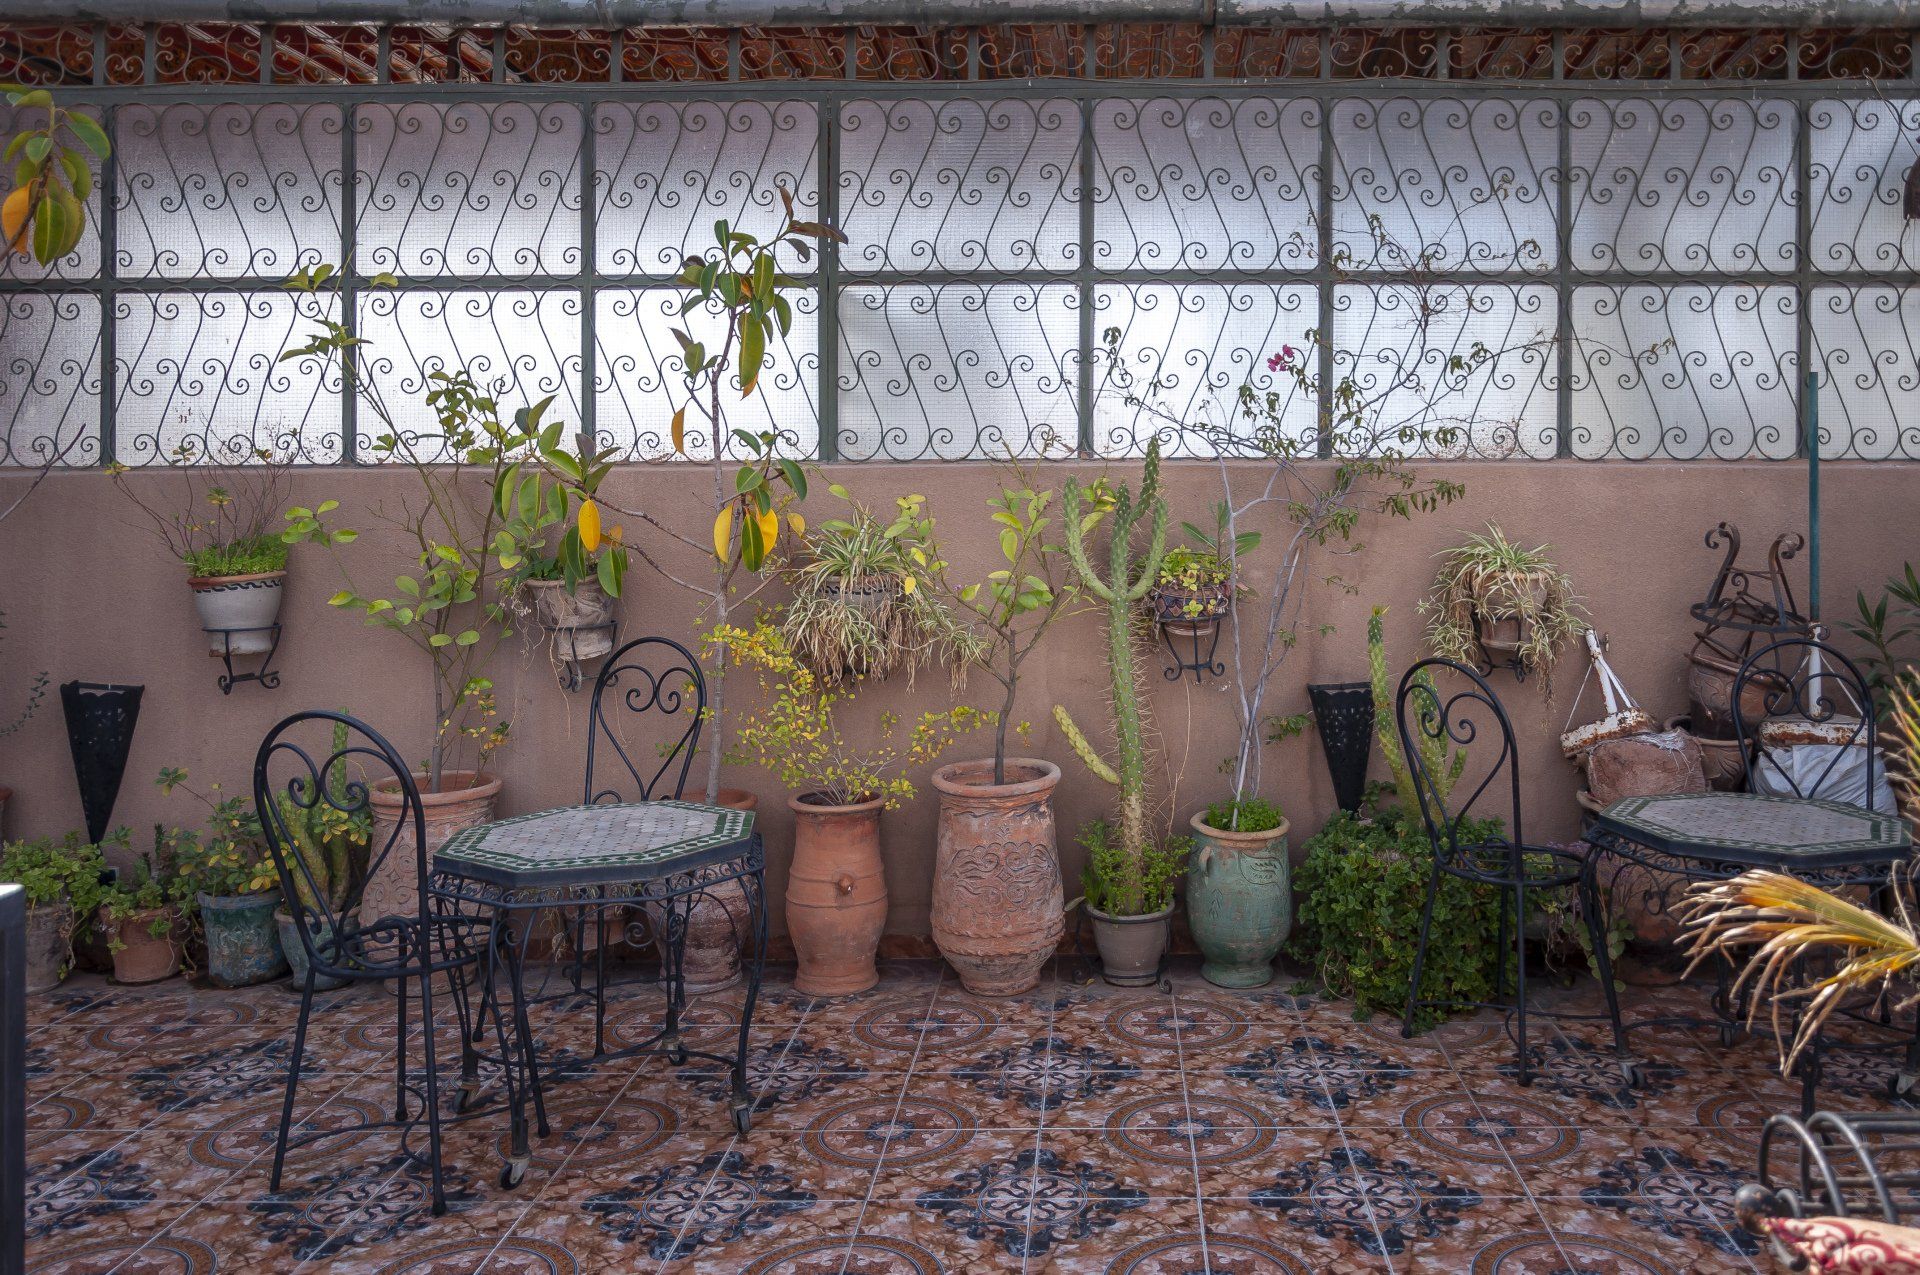 a cozy outdoor patio with plants, seating, and a colorful, patterned tile floor